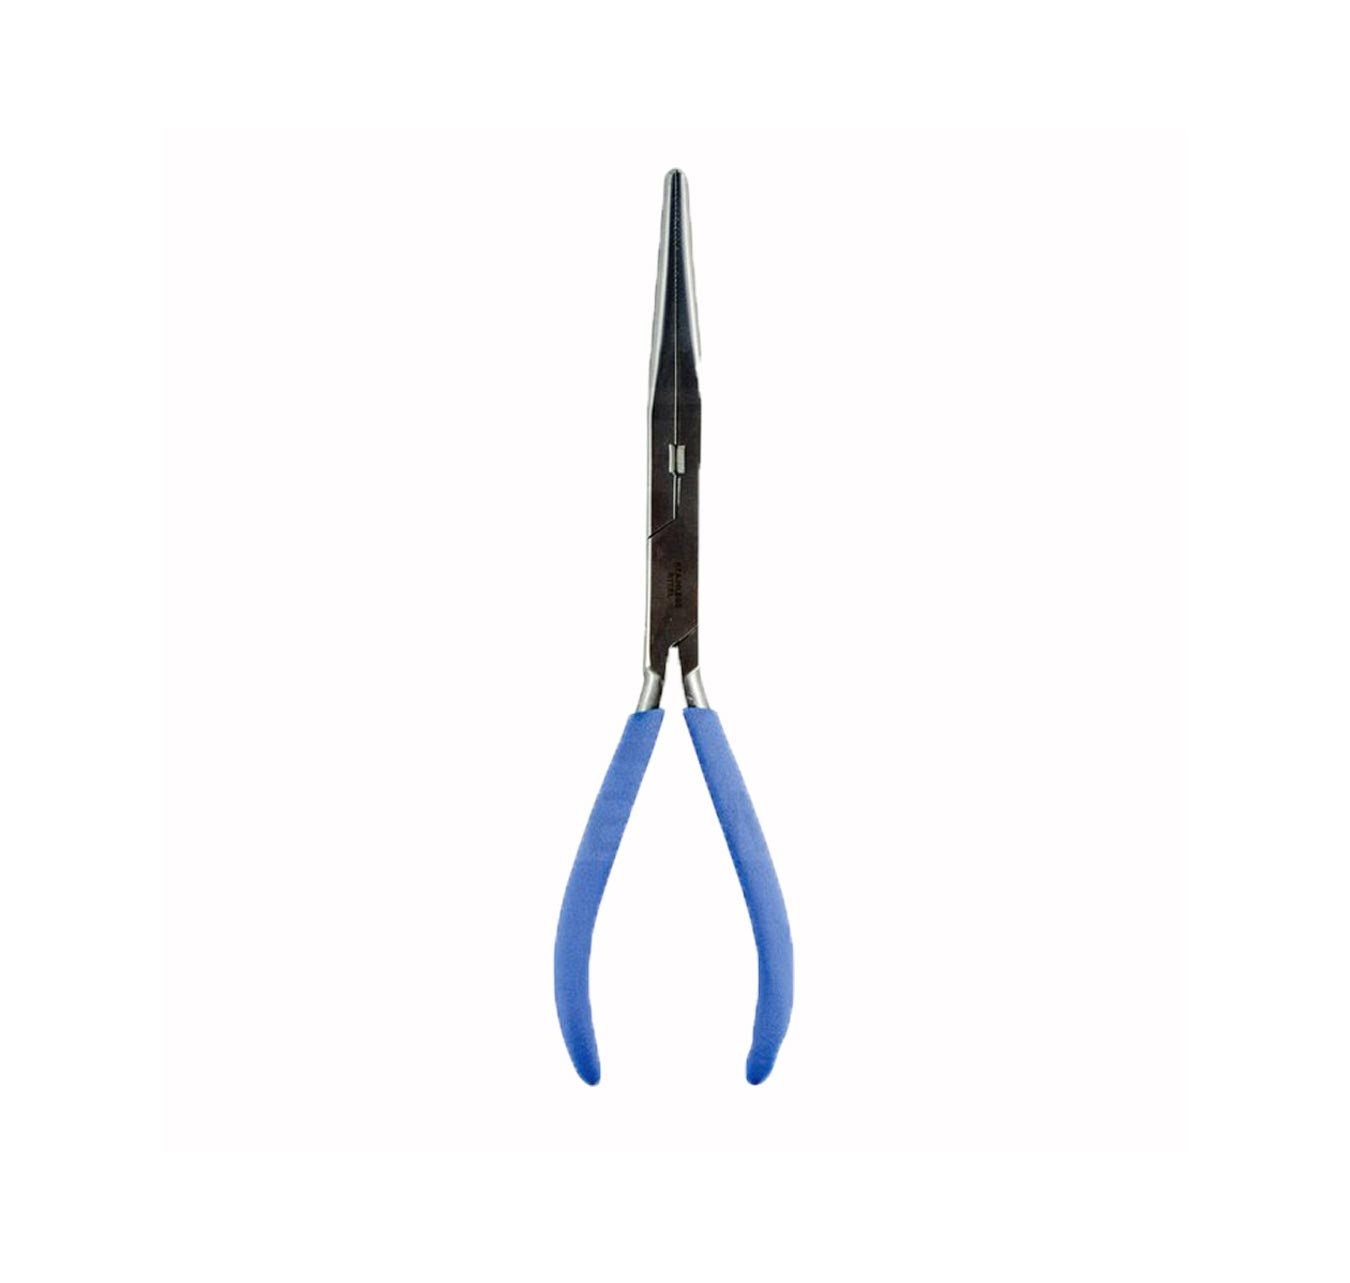 Crimpers, Pliers & Wire Cutters - Fergo's Tackle World